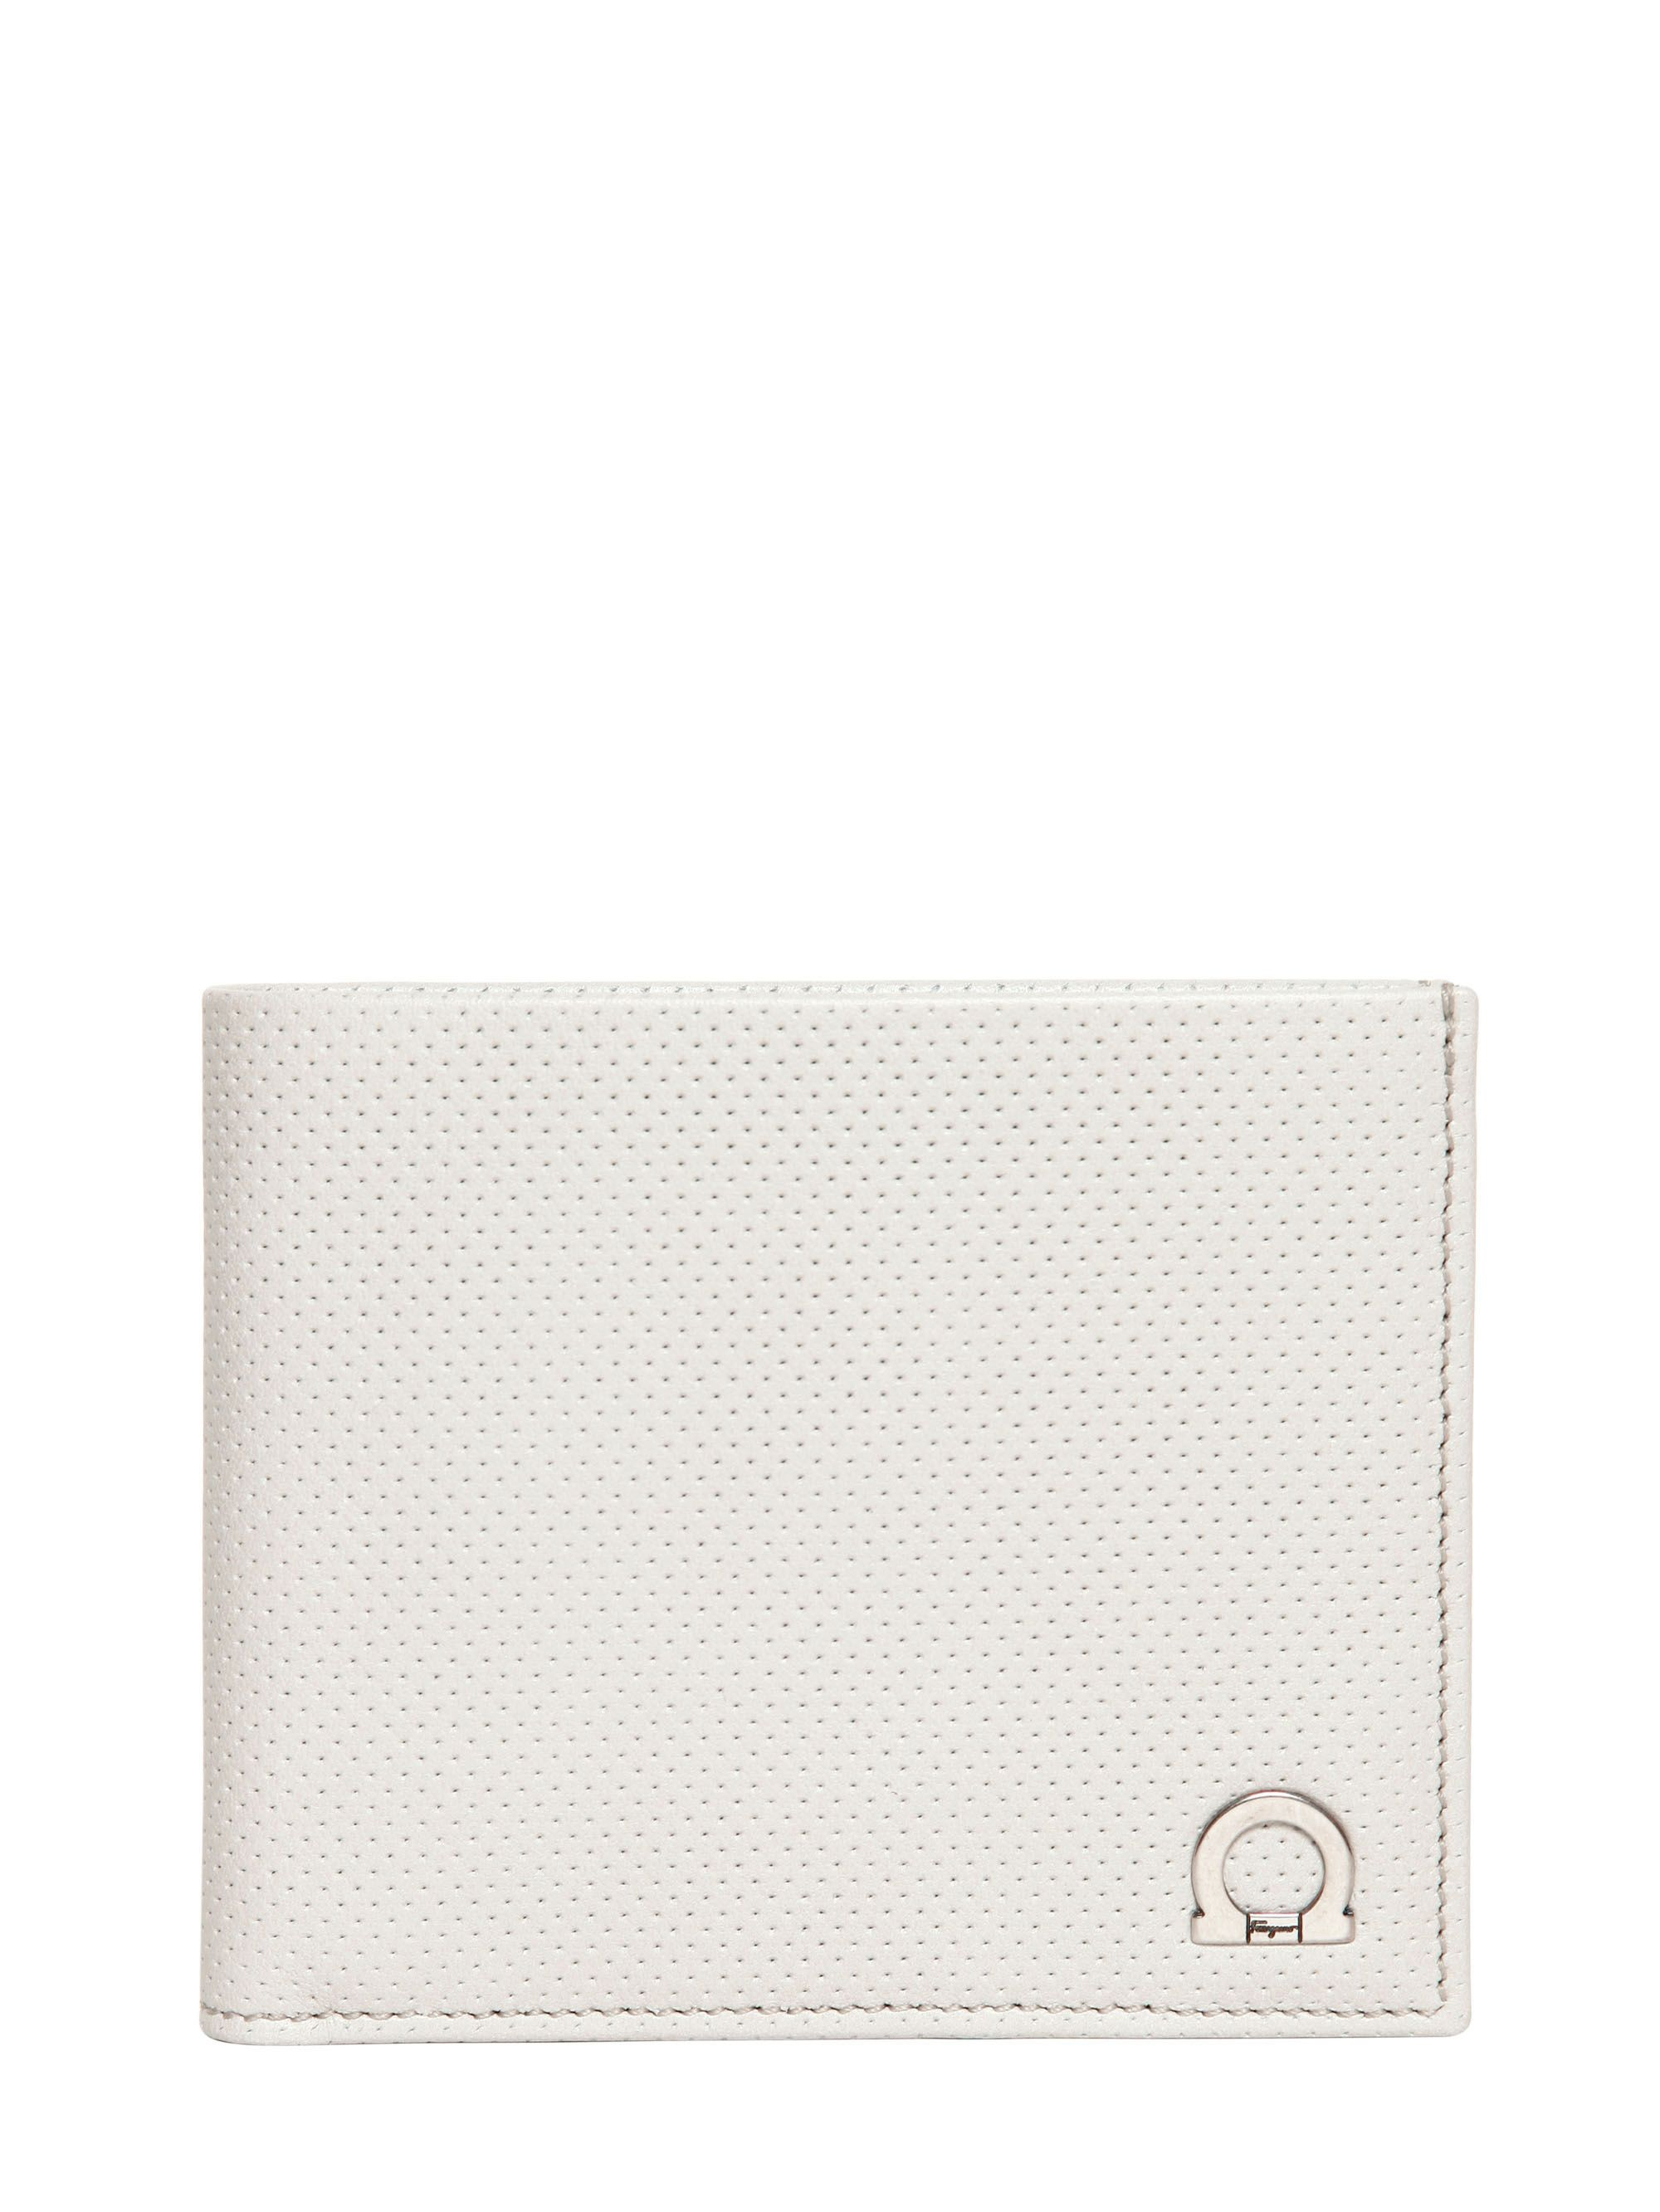 Ferragamo Melrose Perforated Leather Wallet in White for Men - Lyst